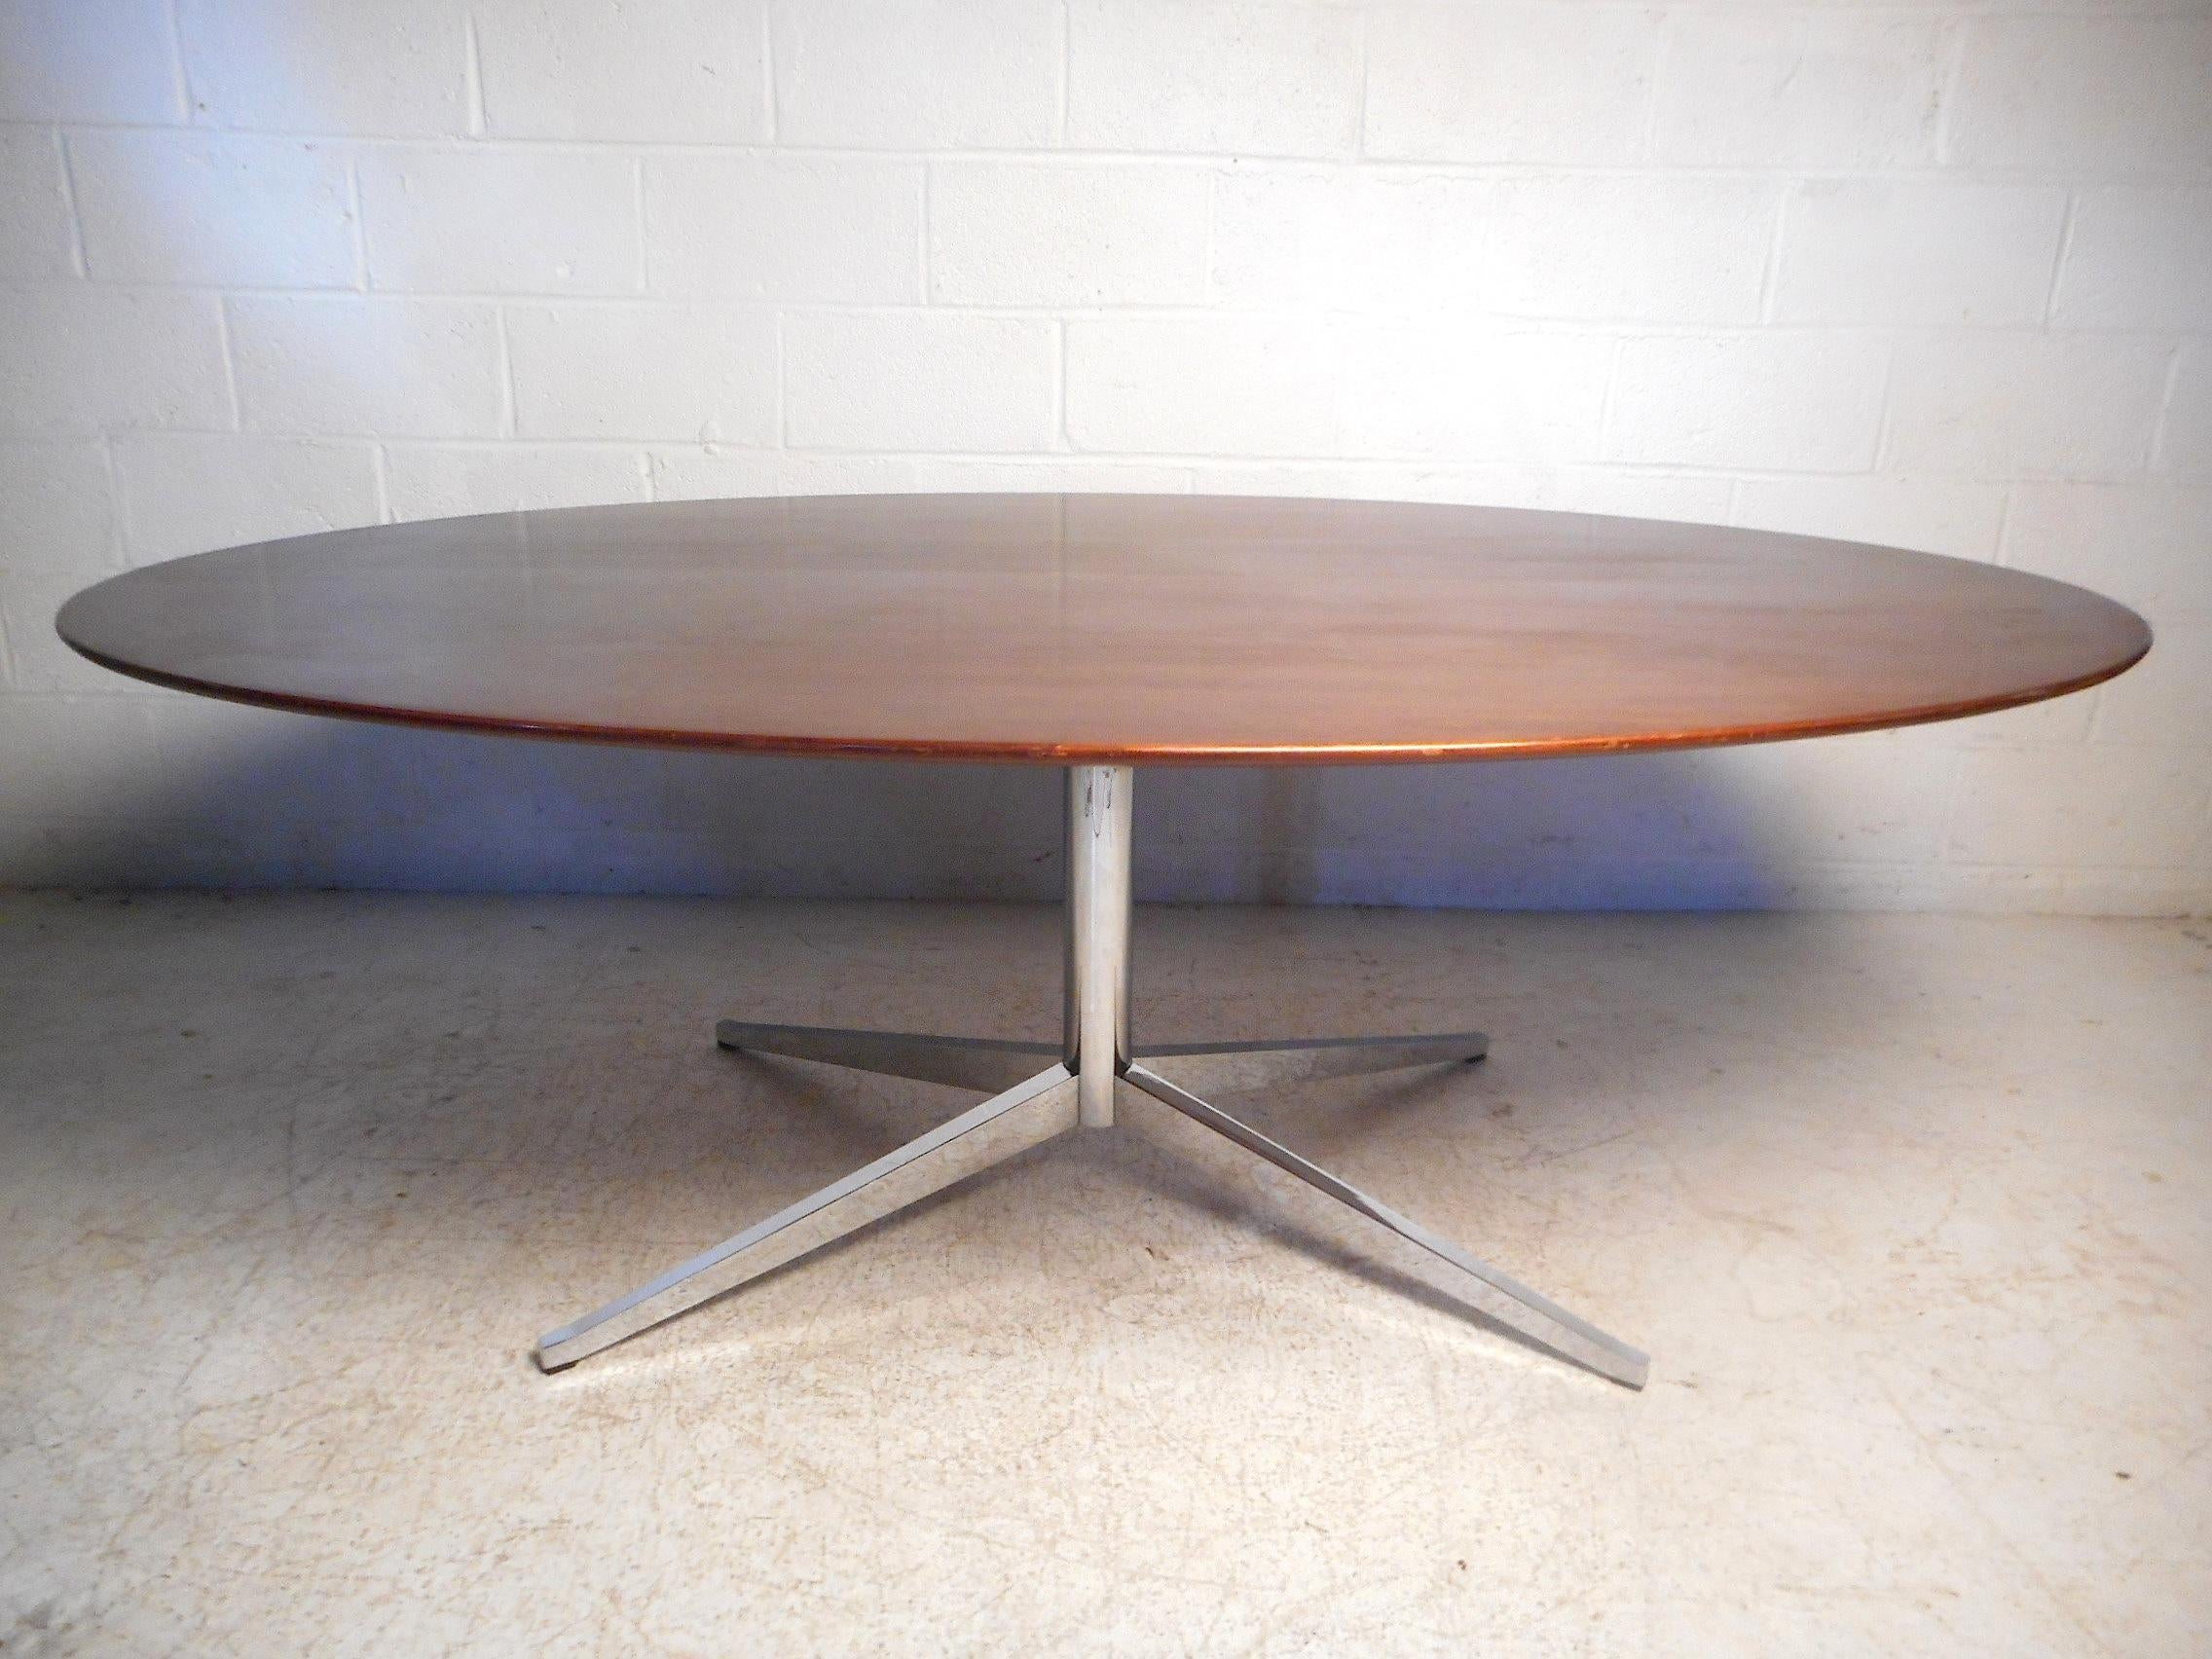 Impressive midcentury dining table by Knoll International. Large wooden tabletop supported by a sturdy chrome base. An impressive addition to any modern interior. Please confirm item location with dealer (NJ or NY).